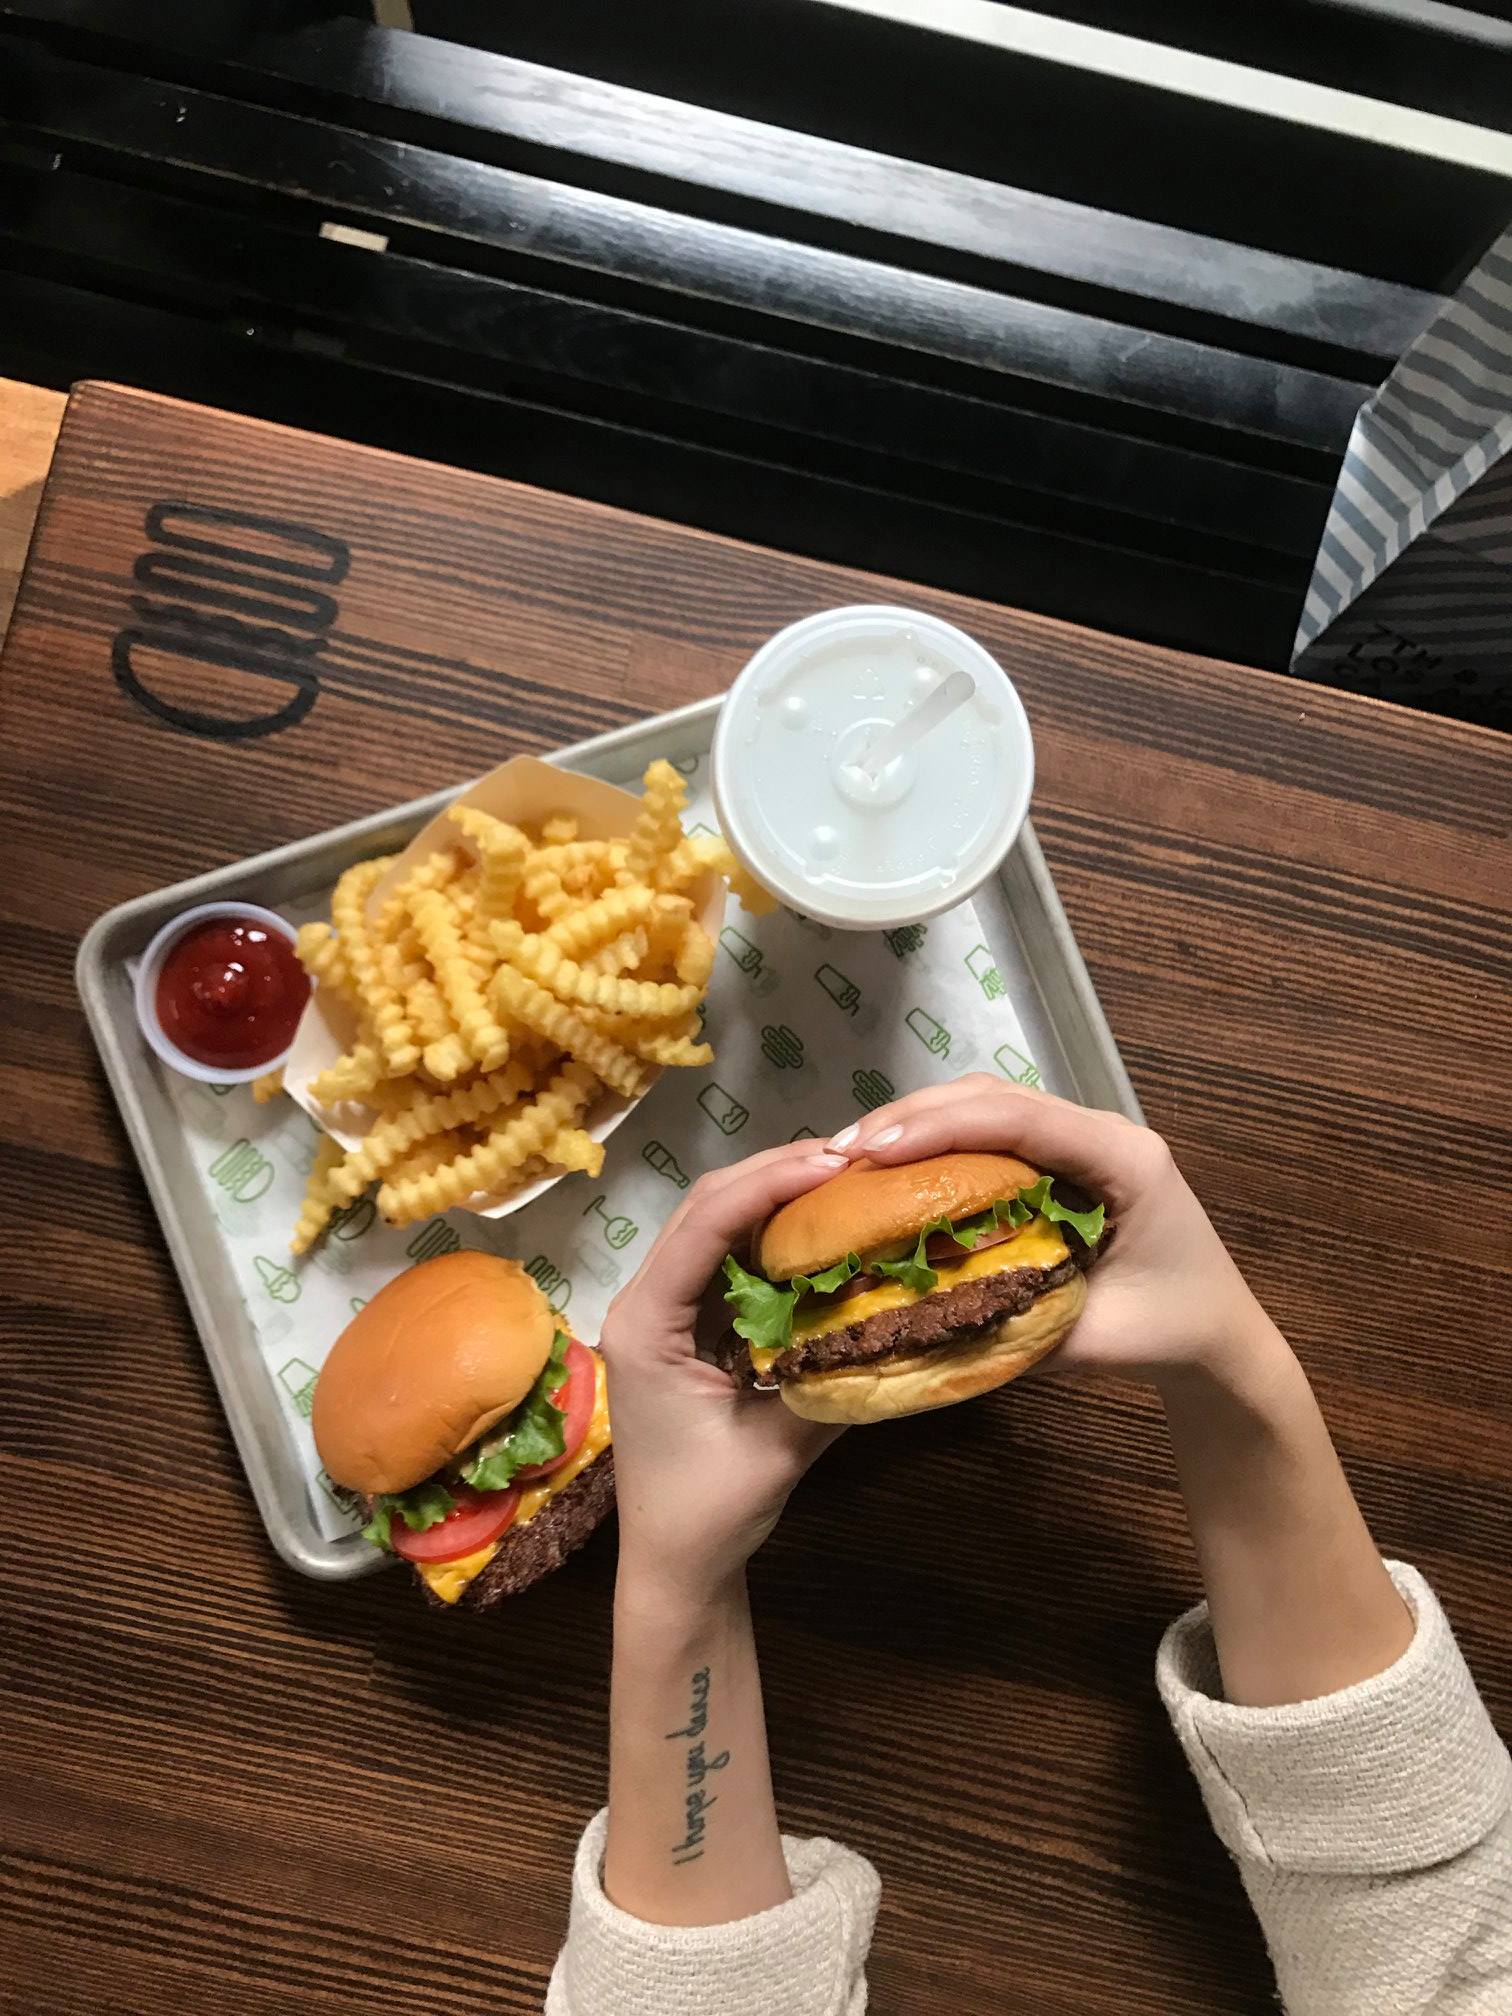 Flat-lay picture of a complete meal of Shack Shack comprising fries, drink and burger